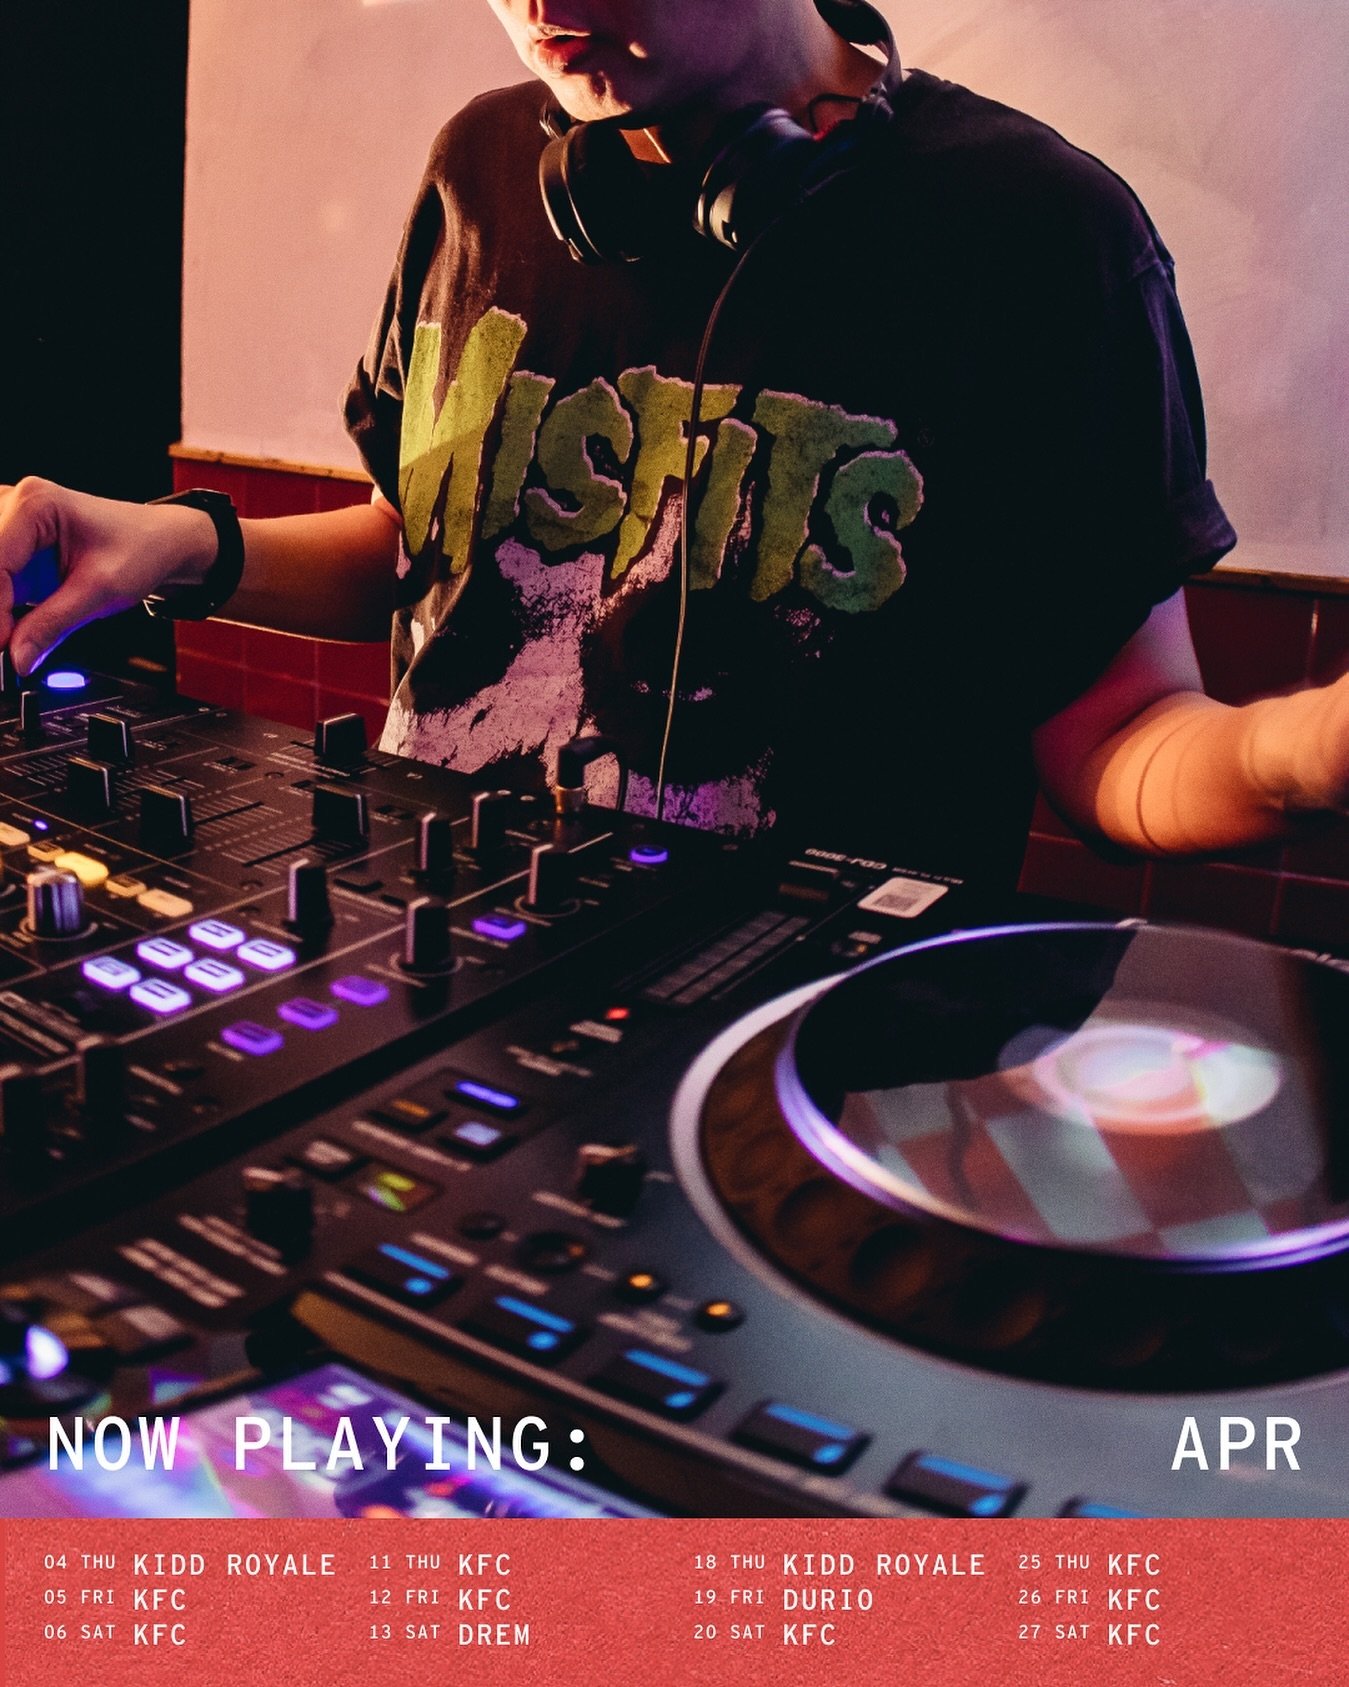 DJ roster for April is looking hotter than your ex; dancing shoes on, get ready for these nights you won&rsquo;t remember and tunes you&rsquo;ll never forget&mdash;weekends from 7pm.